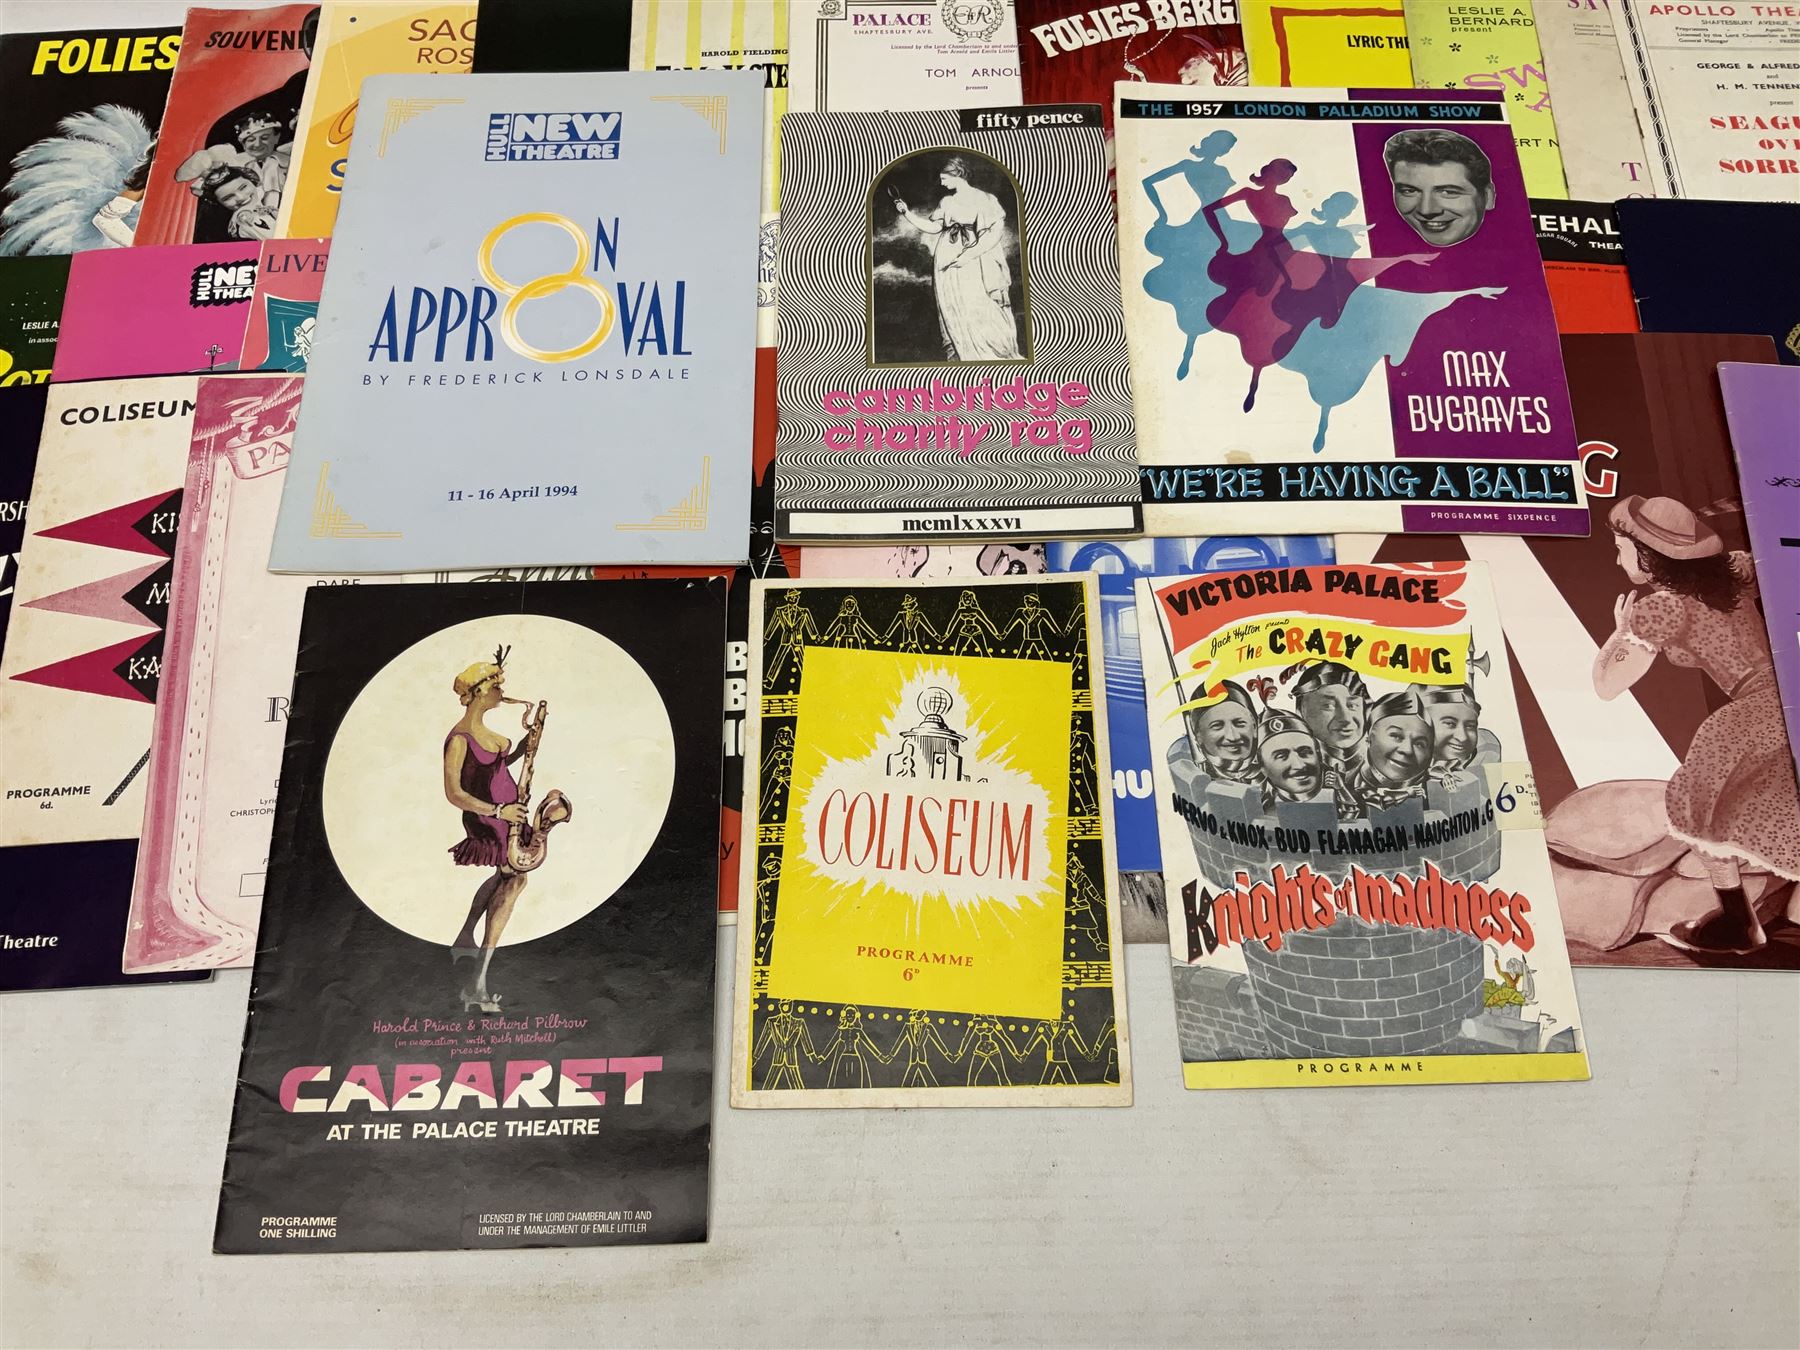 Over thirty theatre programmes 1940s and later including various London theatres - Apollo - Image 3 of 12